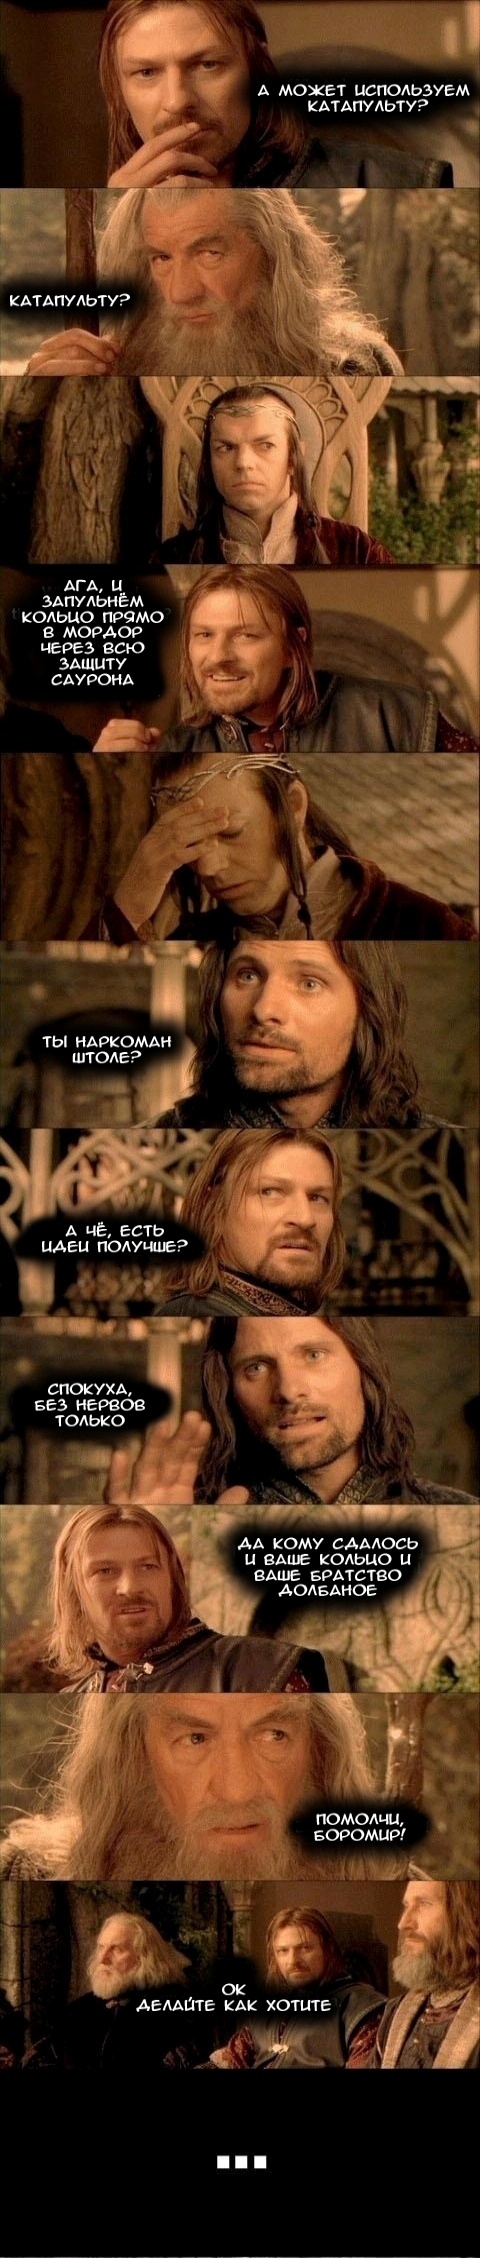 Lord of the Ring Alternative Approach - Lord of the Rings, Humor, Longpost, 